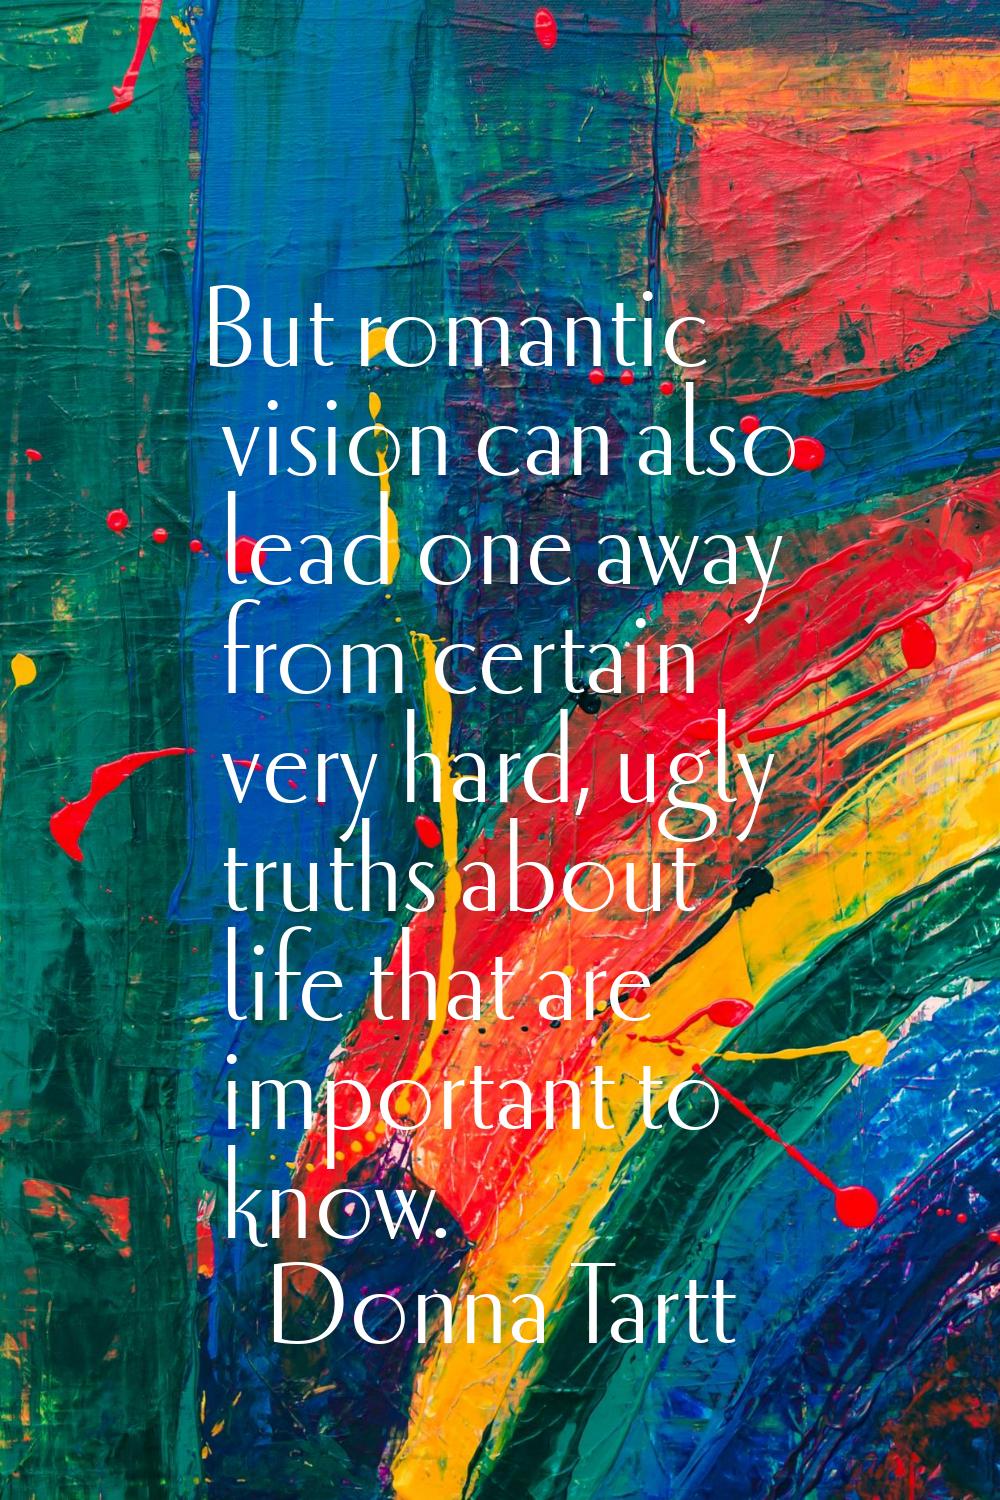 But romantic vision can also lead one away from certain very hard, ugly truths about life that are 